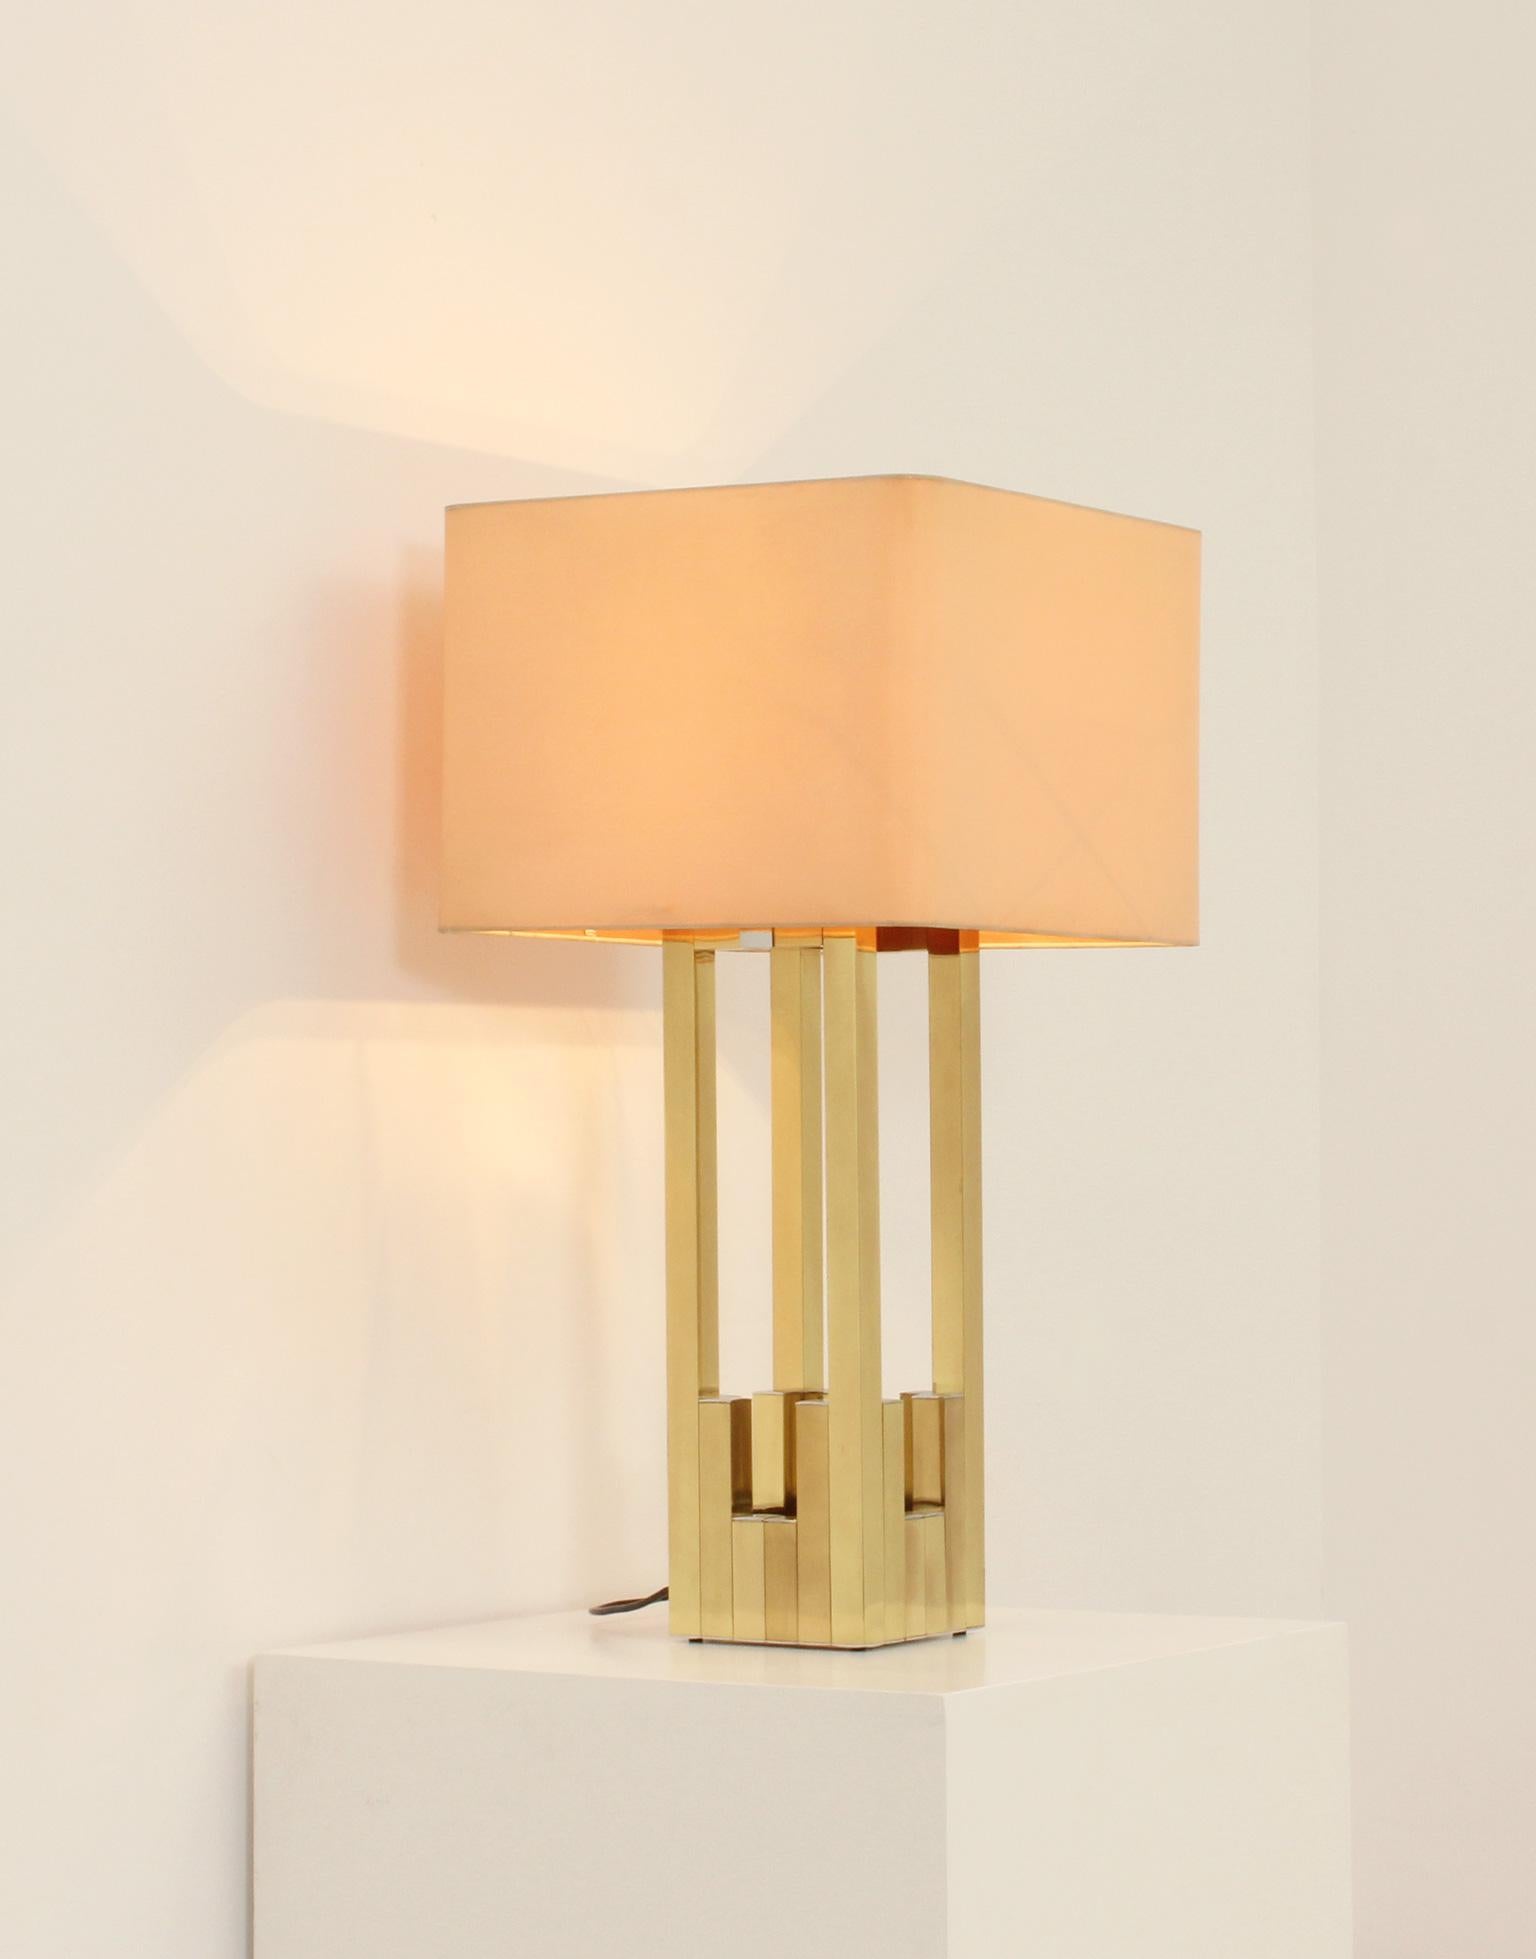 Large Lumica Brass Table Lamp, Spain, 1970s For Sale 5